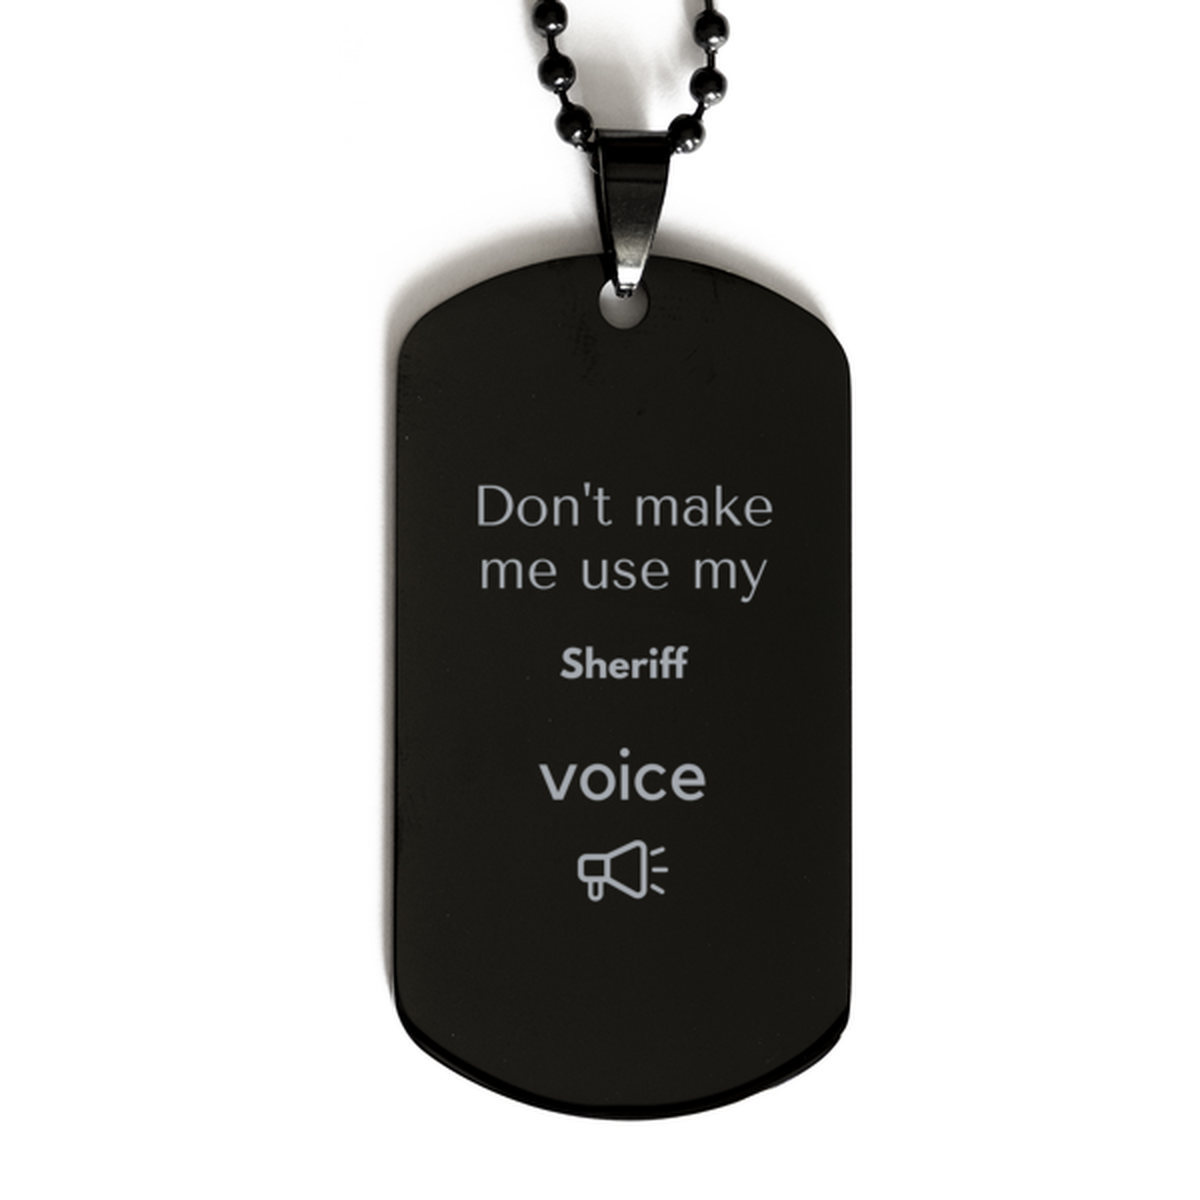 Don't make me use my Sheriff voice, Sarcasm Sheriff Gifts, Christmas Sheriff Black Dog Tag Birthday Unique Gifts For Sheriff Coworkers, Men, Women, Colleague, Friends